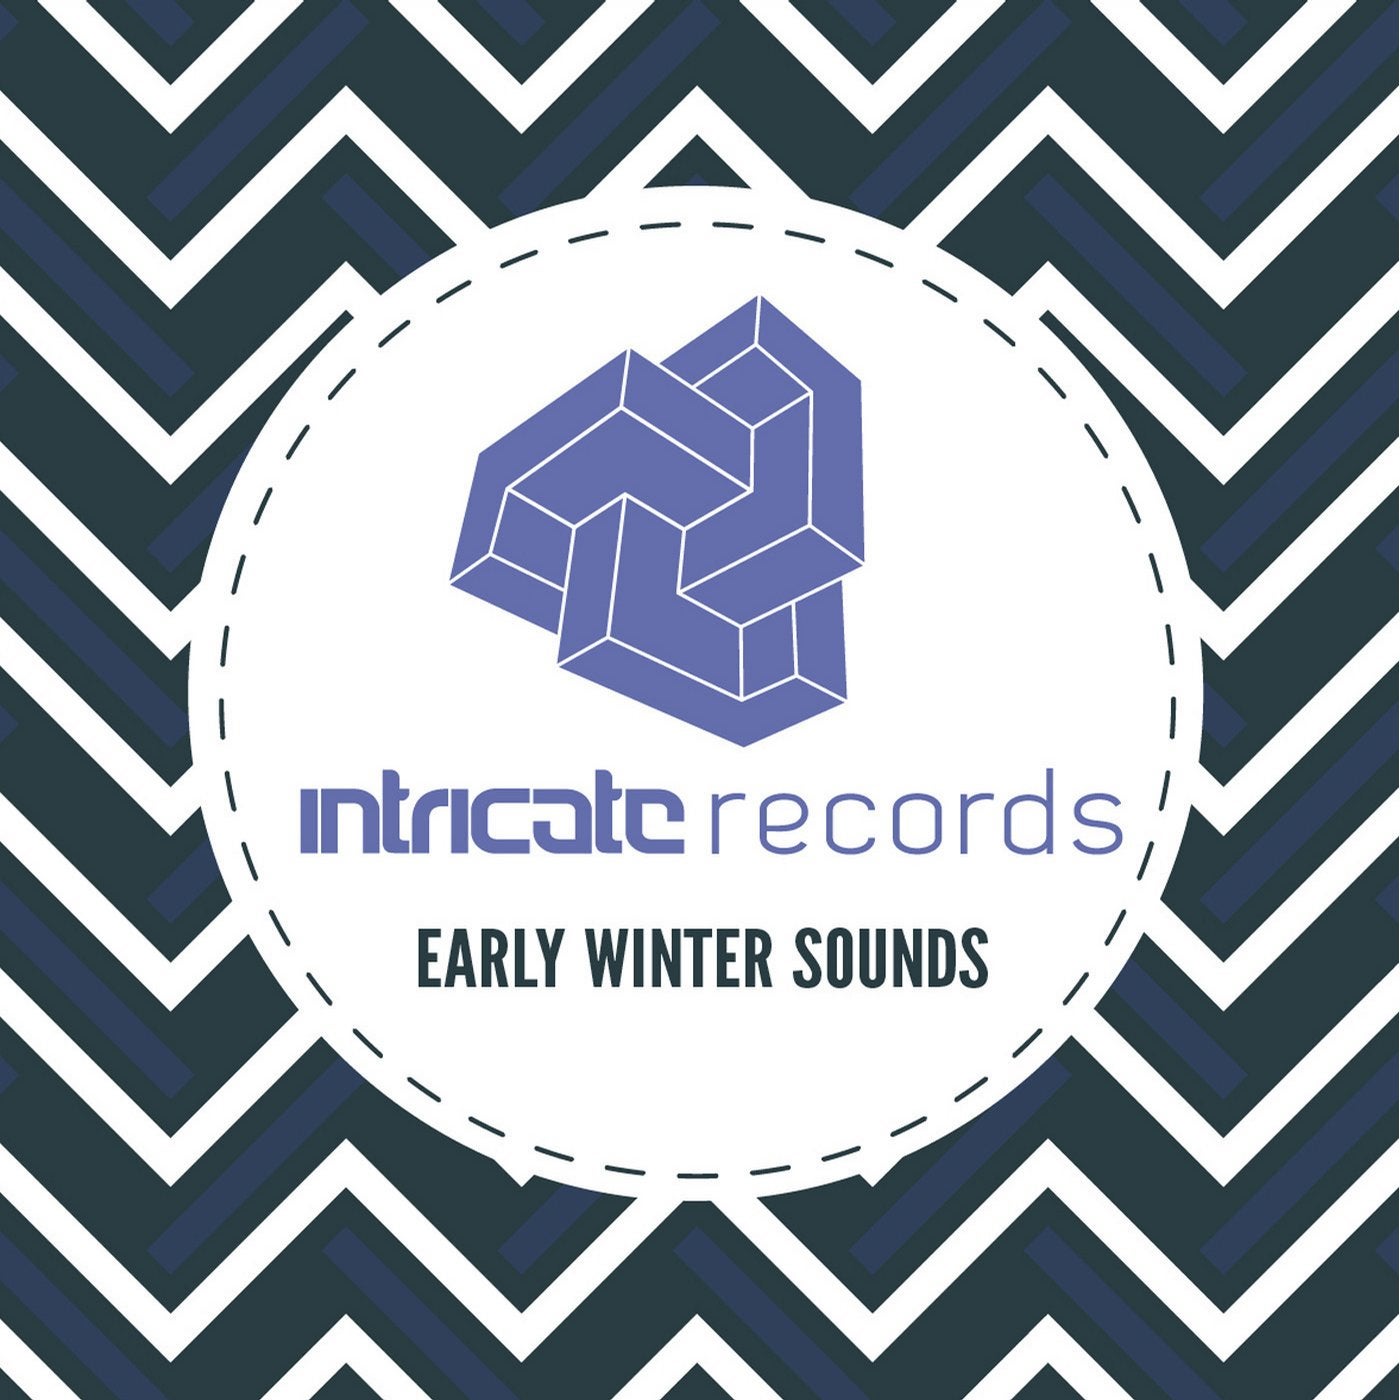 Early Winter Sounds